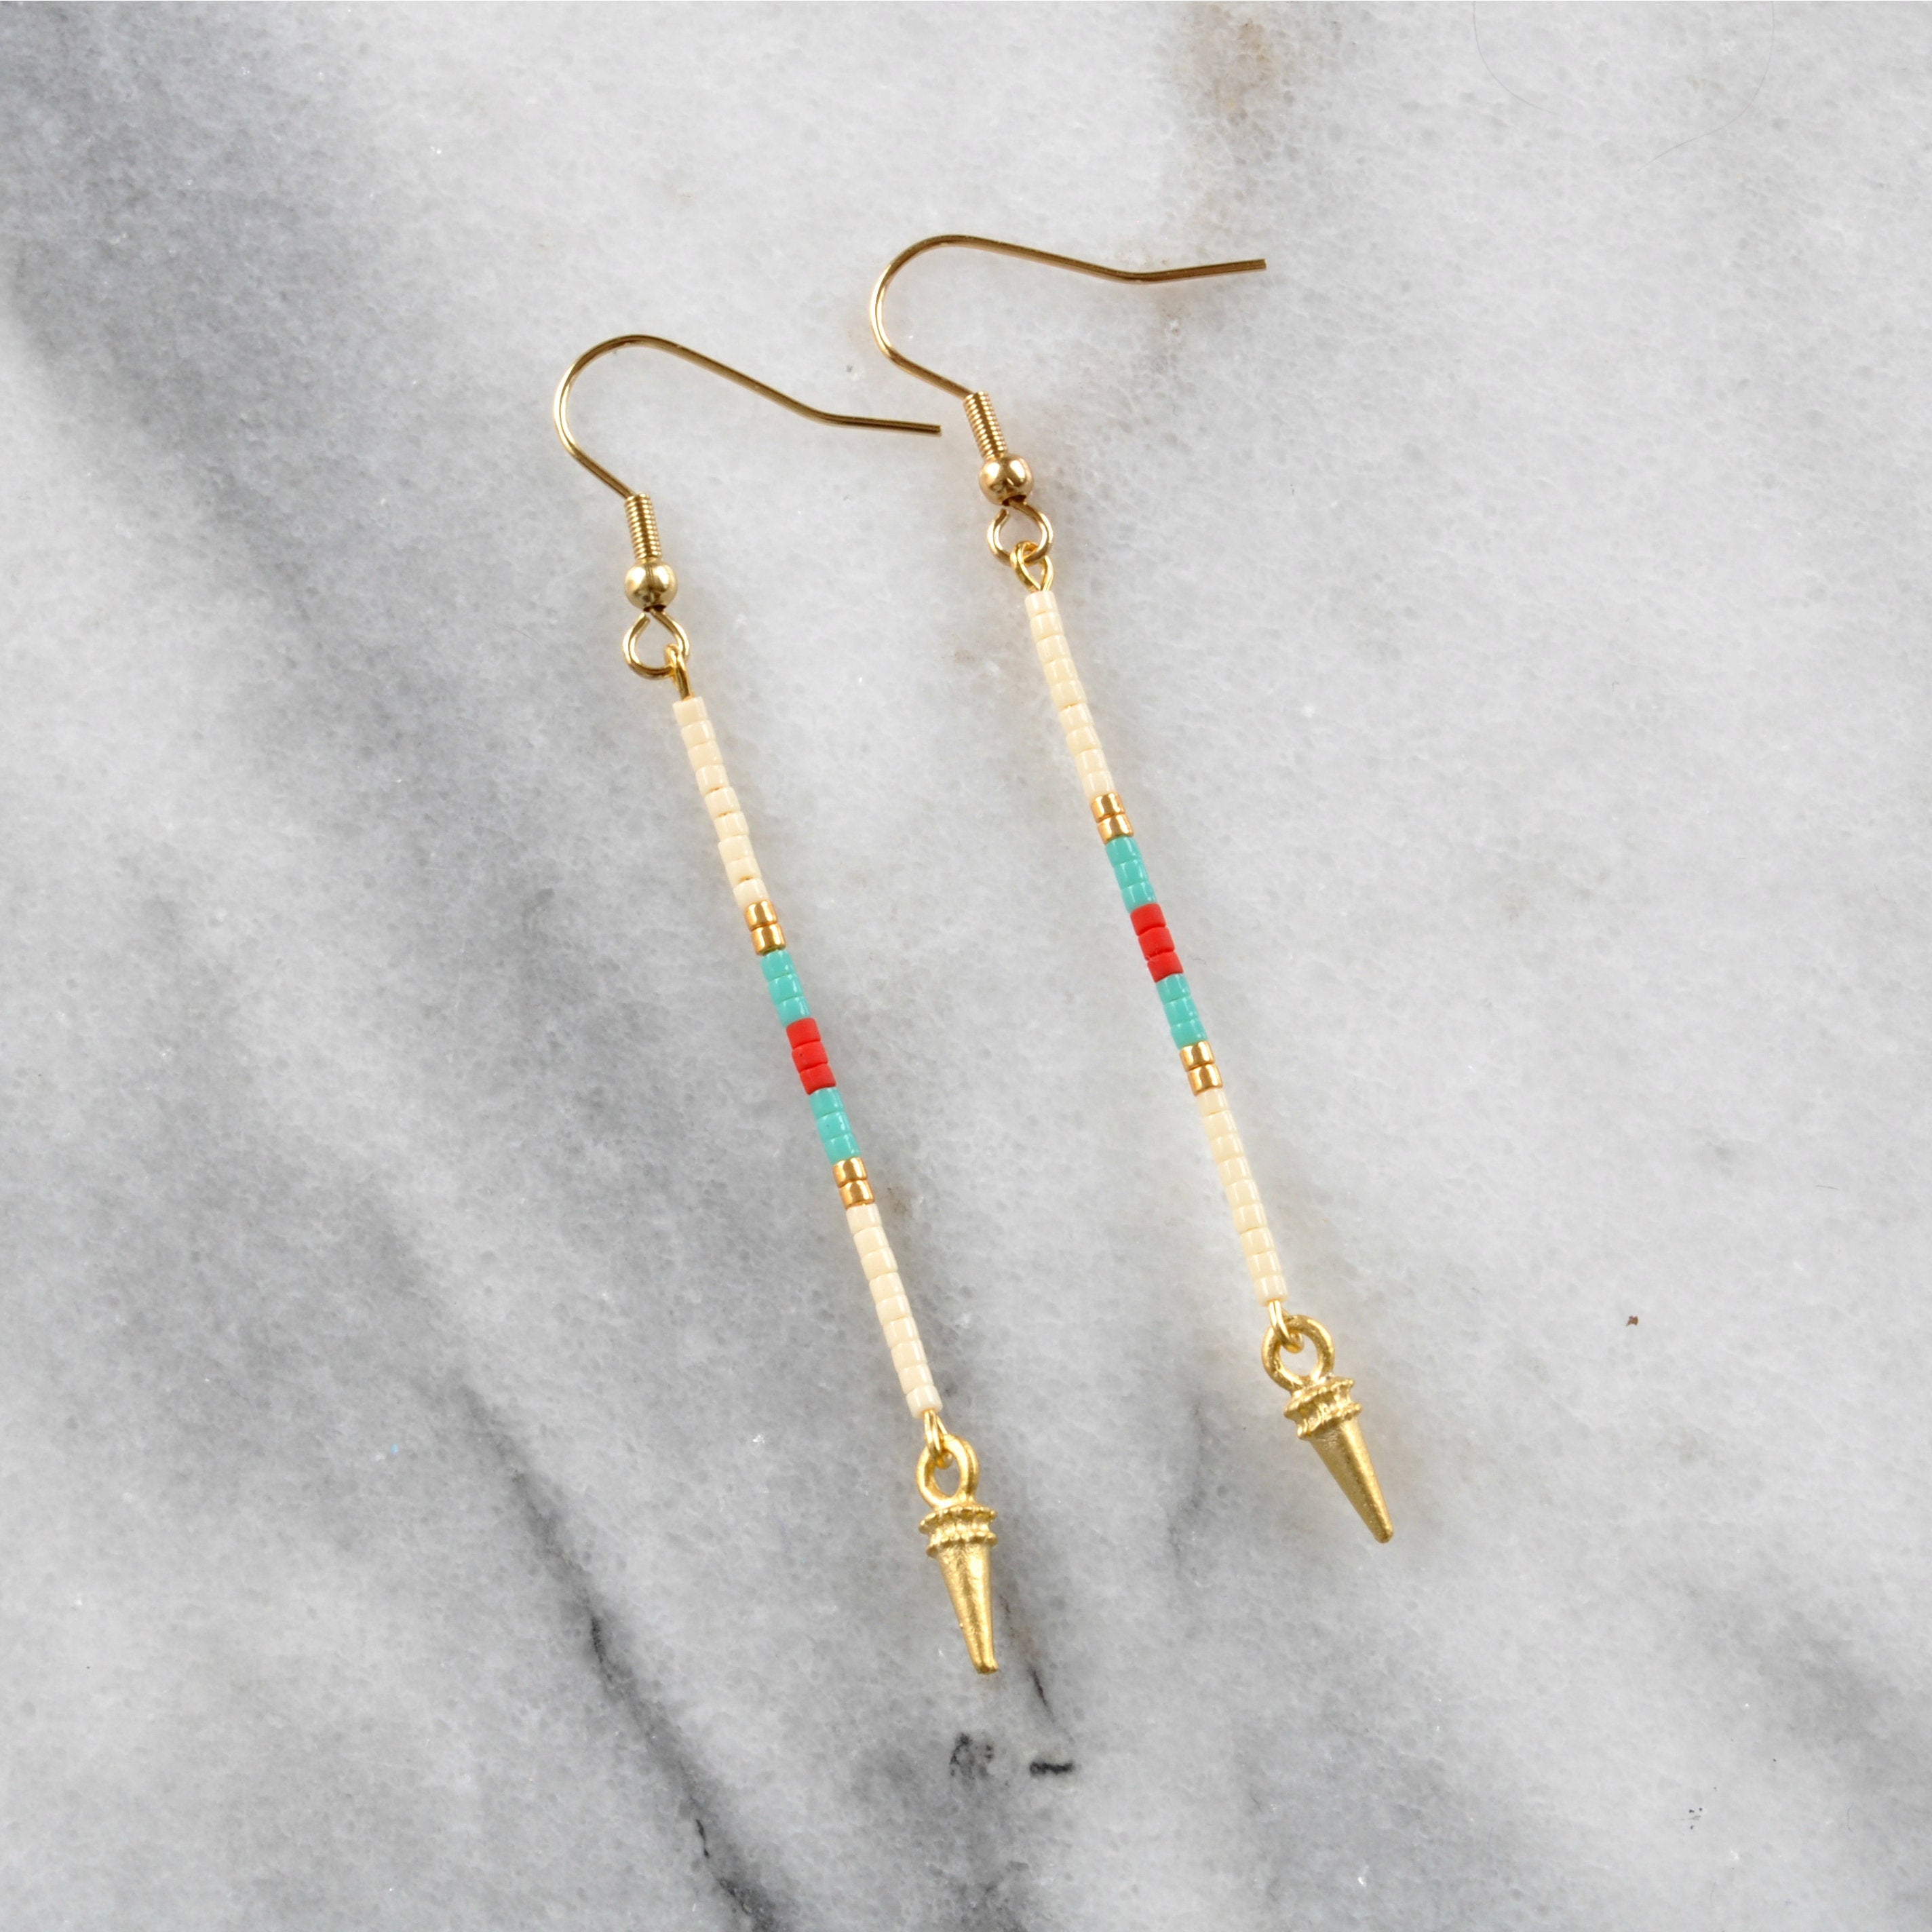 Long beaded earrings from Libby & Smee with a gold earwire and beaded pattern in Phoenix pattern with cream, turquoise, red and gold beads 